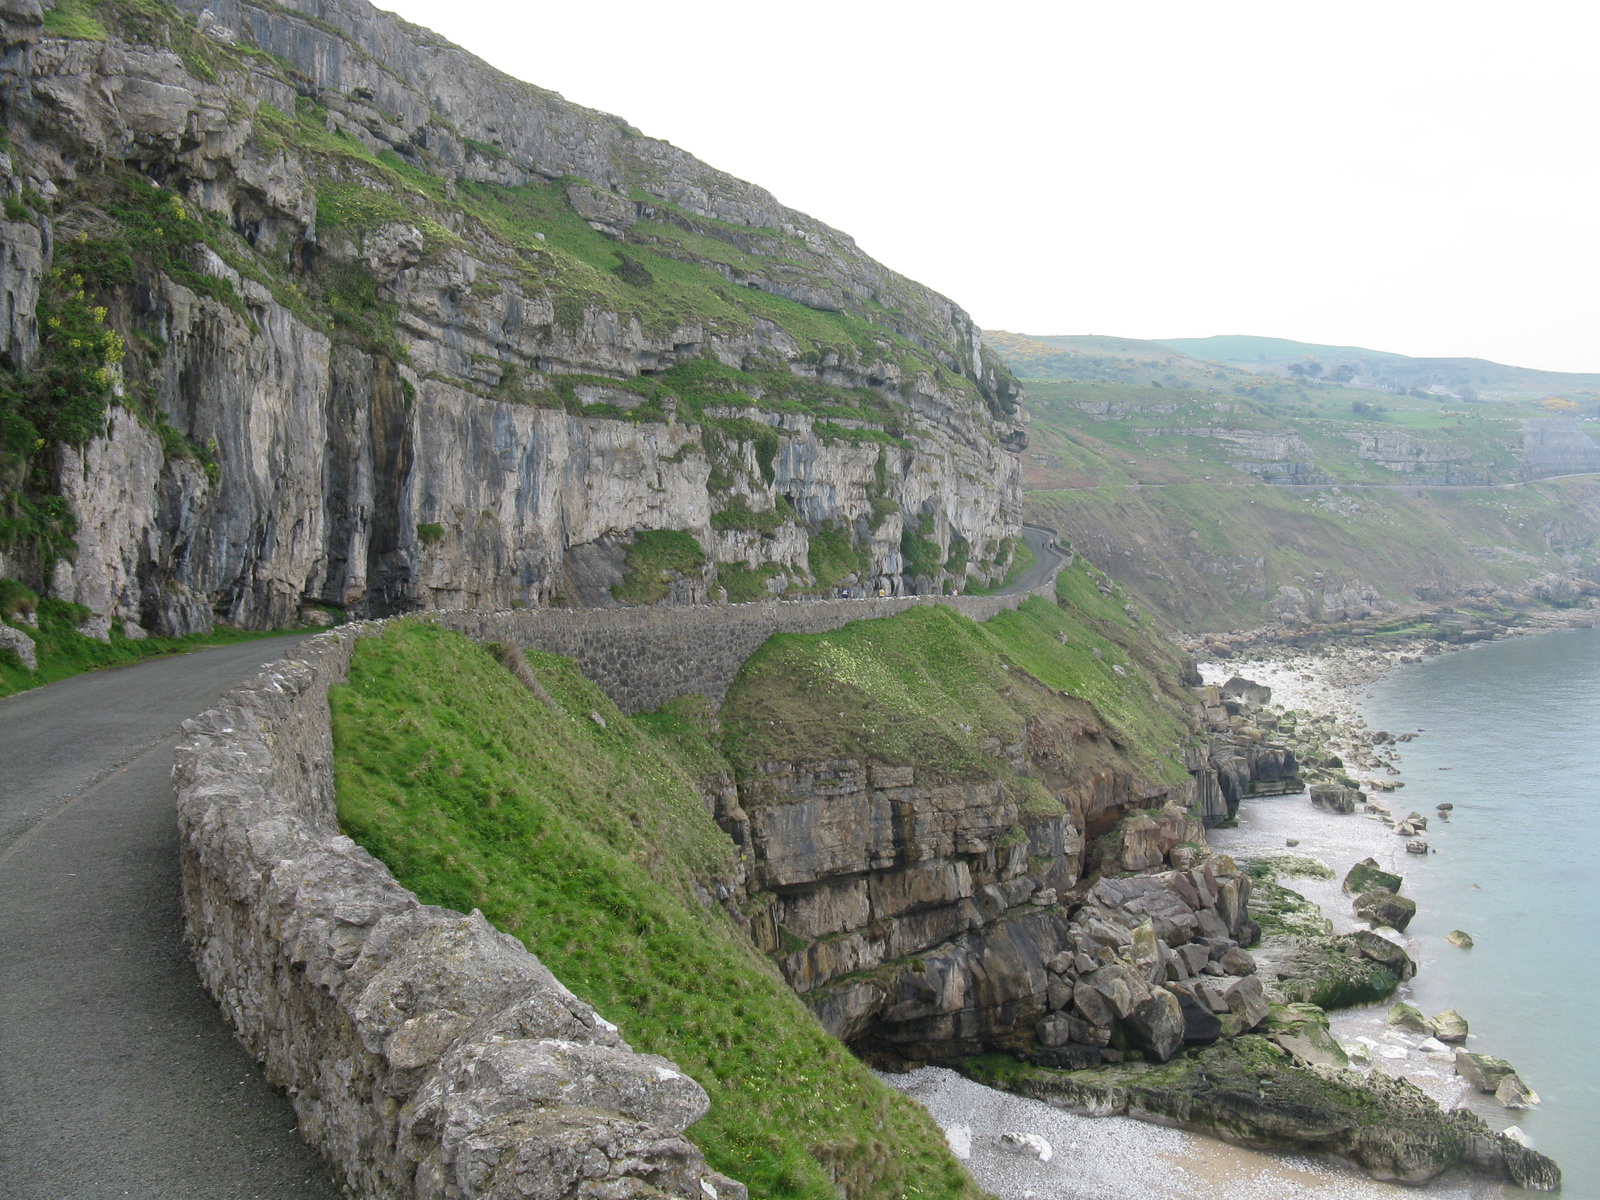 The road around Great Orme